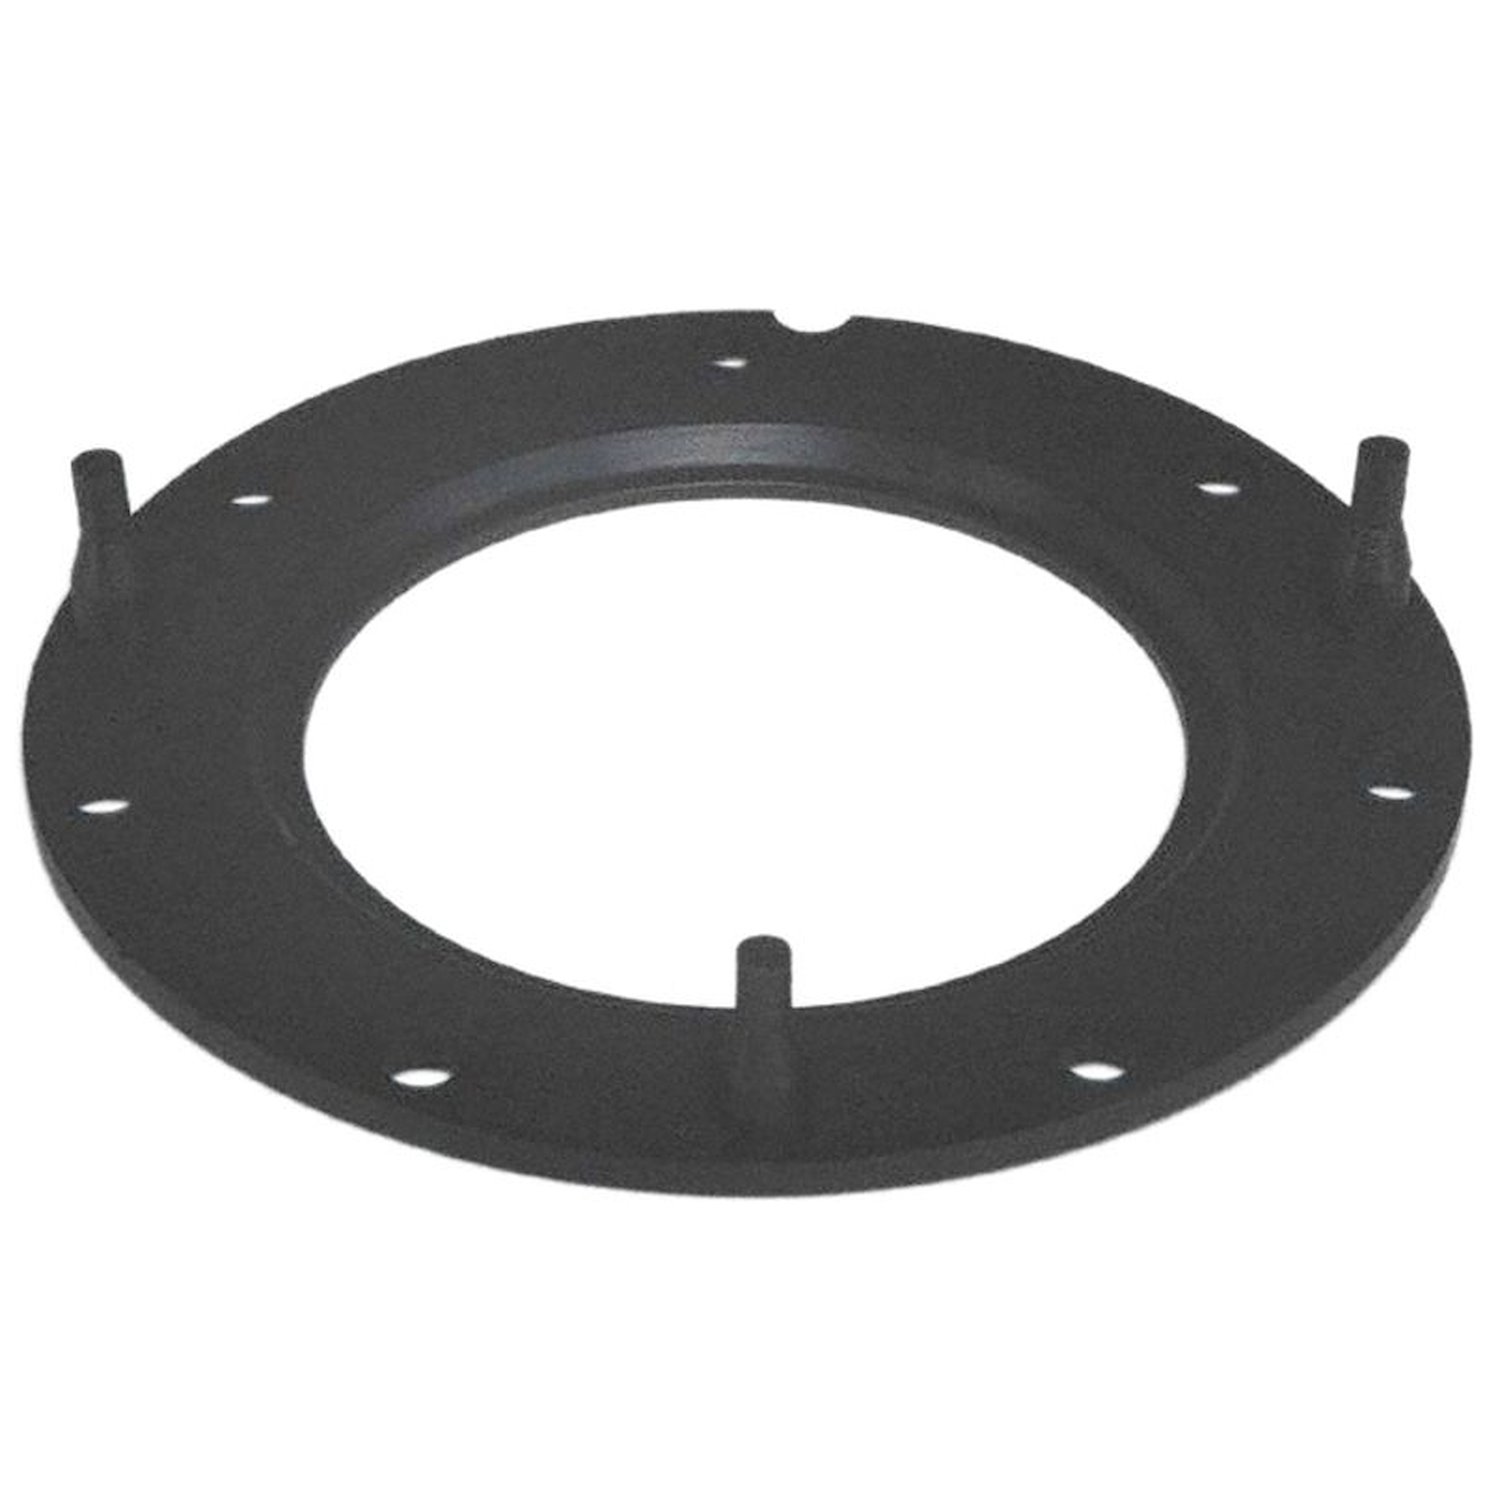 Fuel Pump Tank Seal for 1983-1987 Toyota Celica